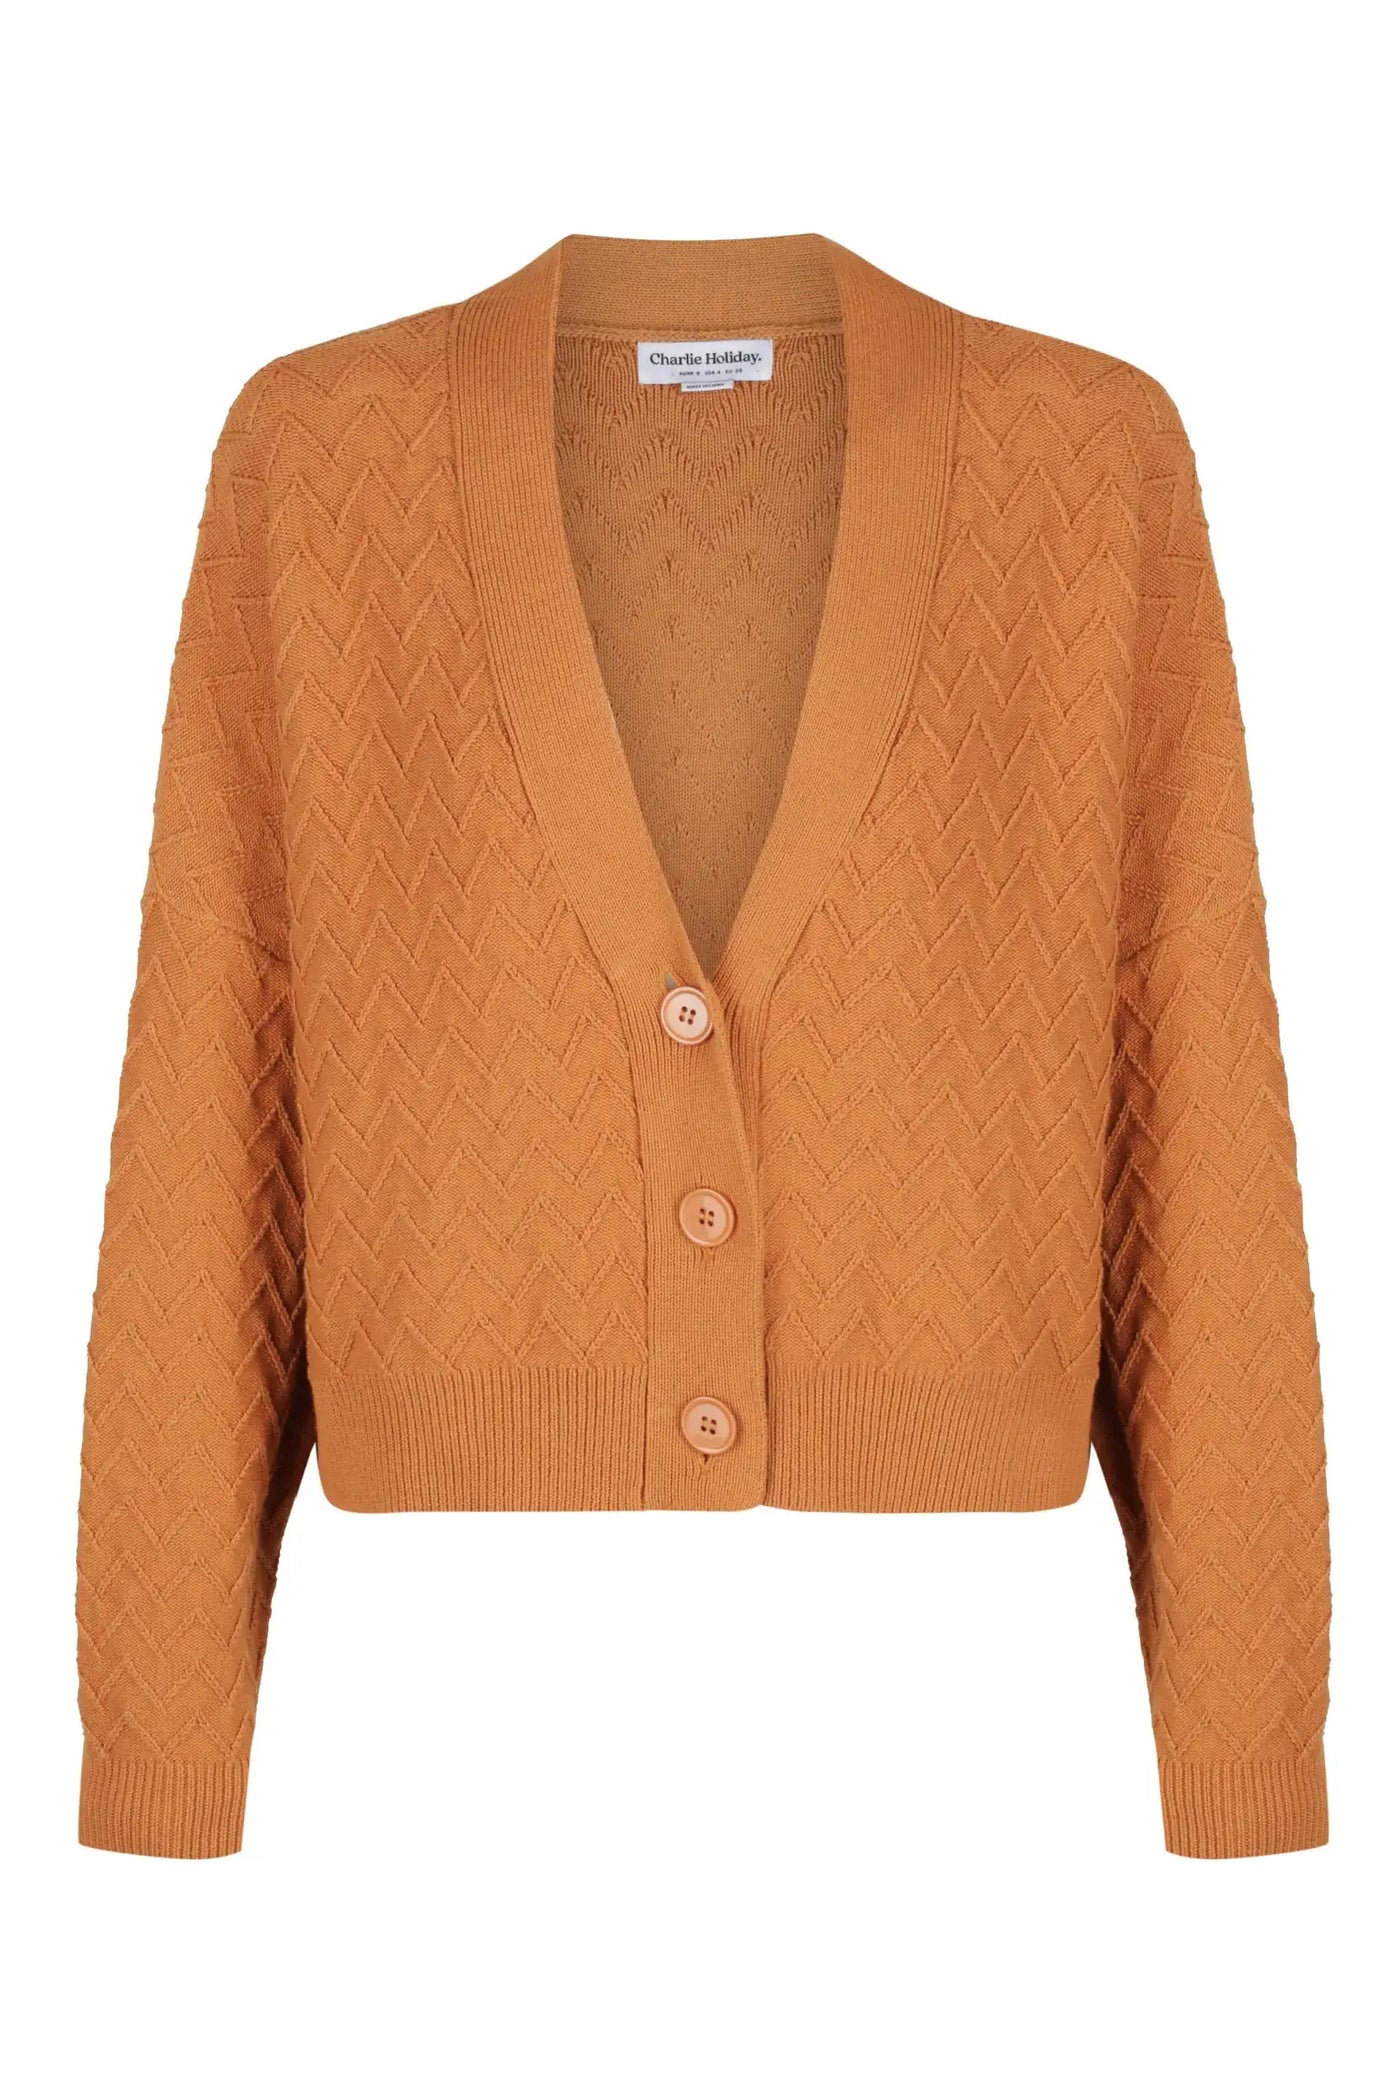 CHARLIE HOLIDAY CAMILLA CARDIGAN - SUNDIAL   The Charlie Holiday Camilla Cardigan is now available in; Sundial and is a soft knitted cardigan perfect for the cooling seasons.